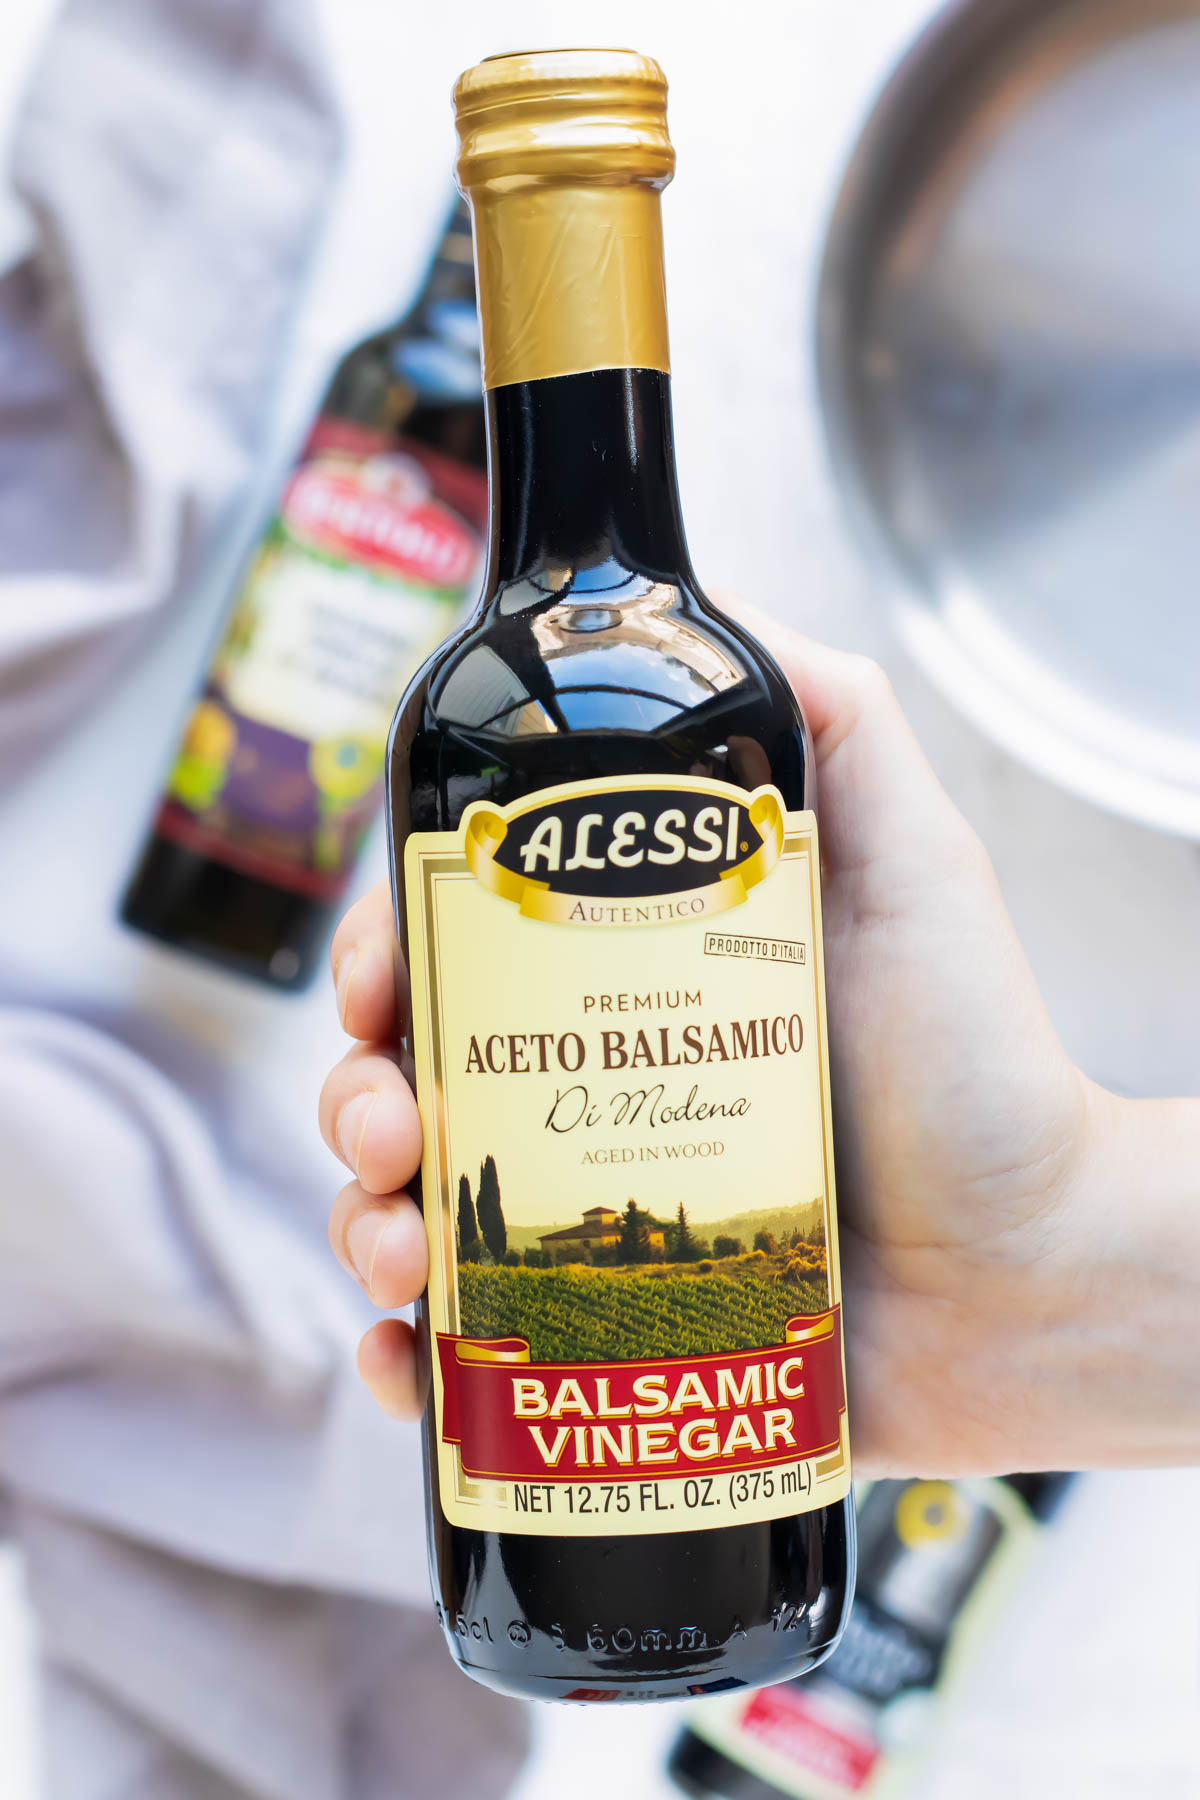 A bottle of balsamic vinegar being held for a balsamic reduction recipe.